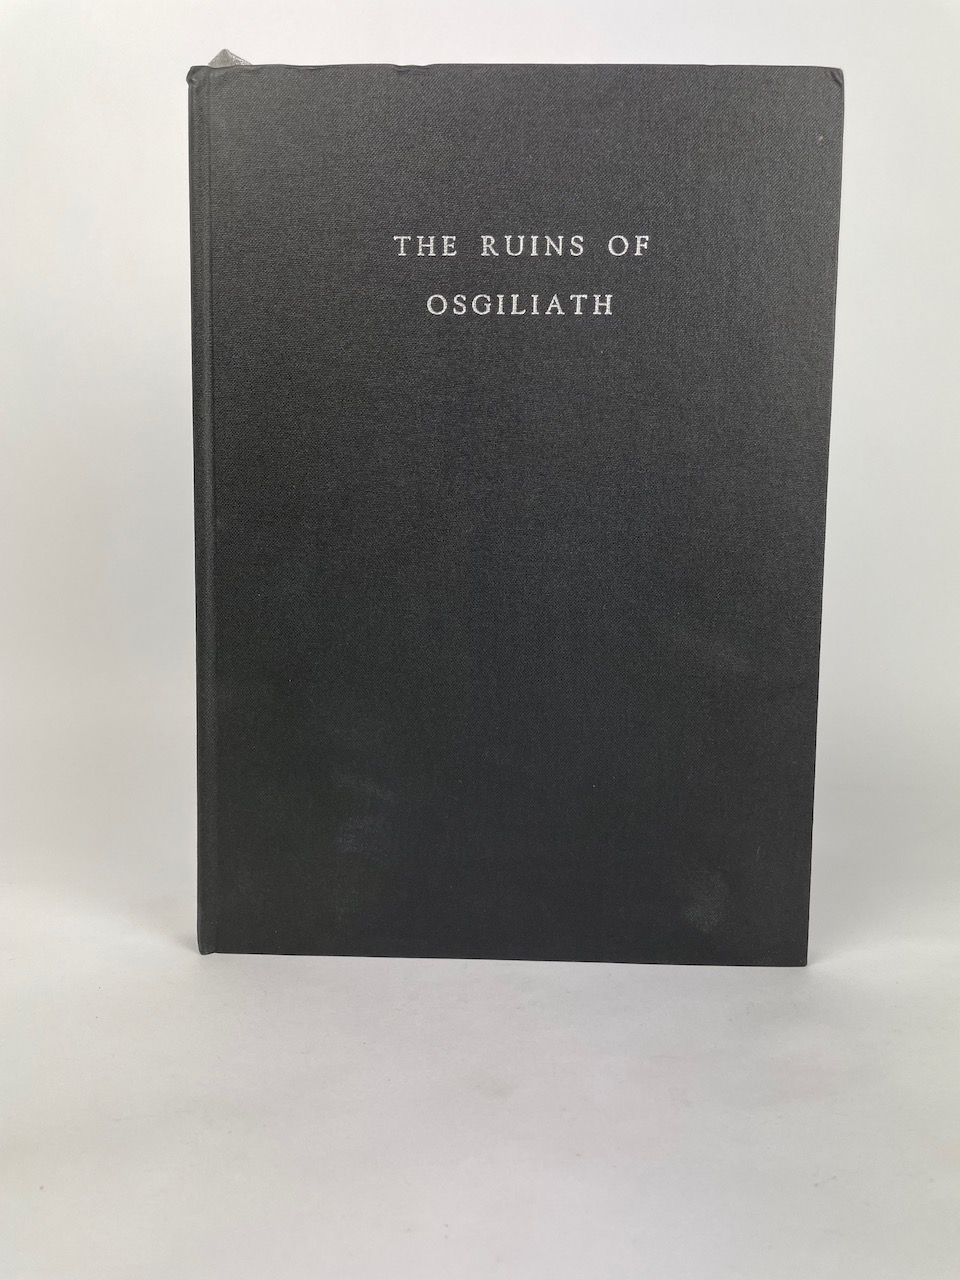 The Ruins of Osgiliath, Signed Limited Numbered Edition, nr 25 of 100